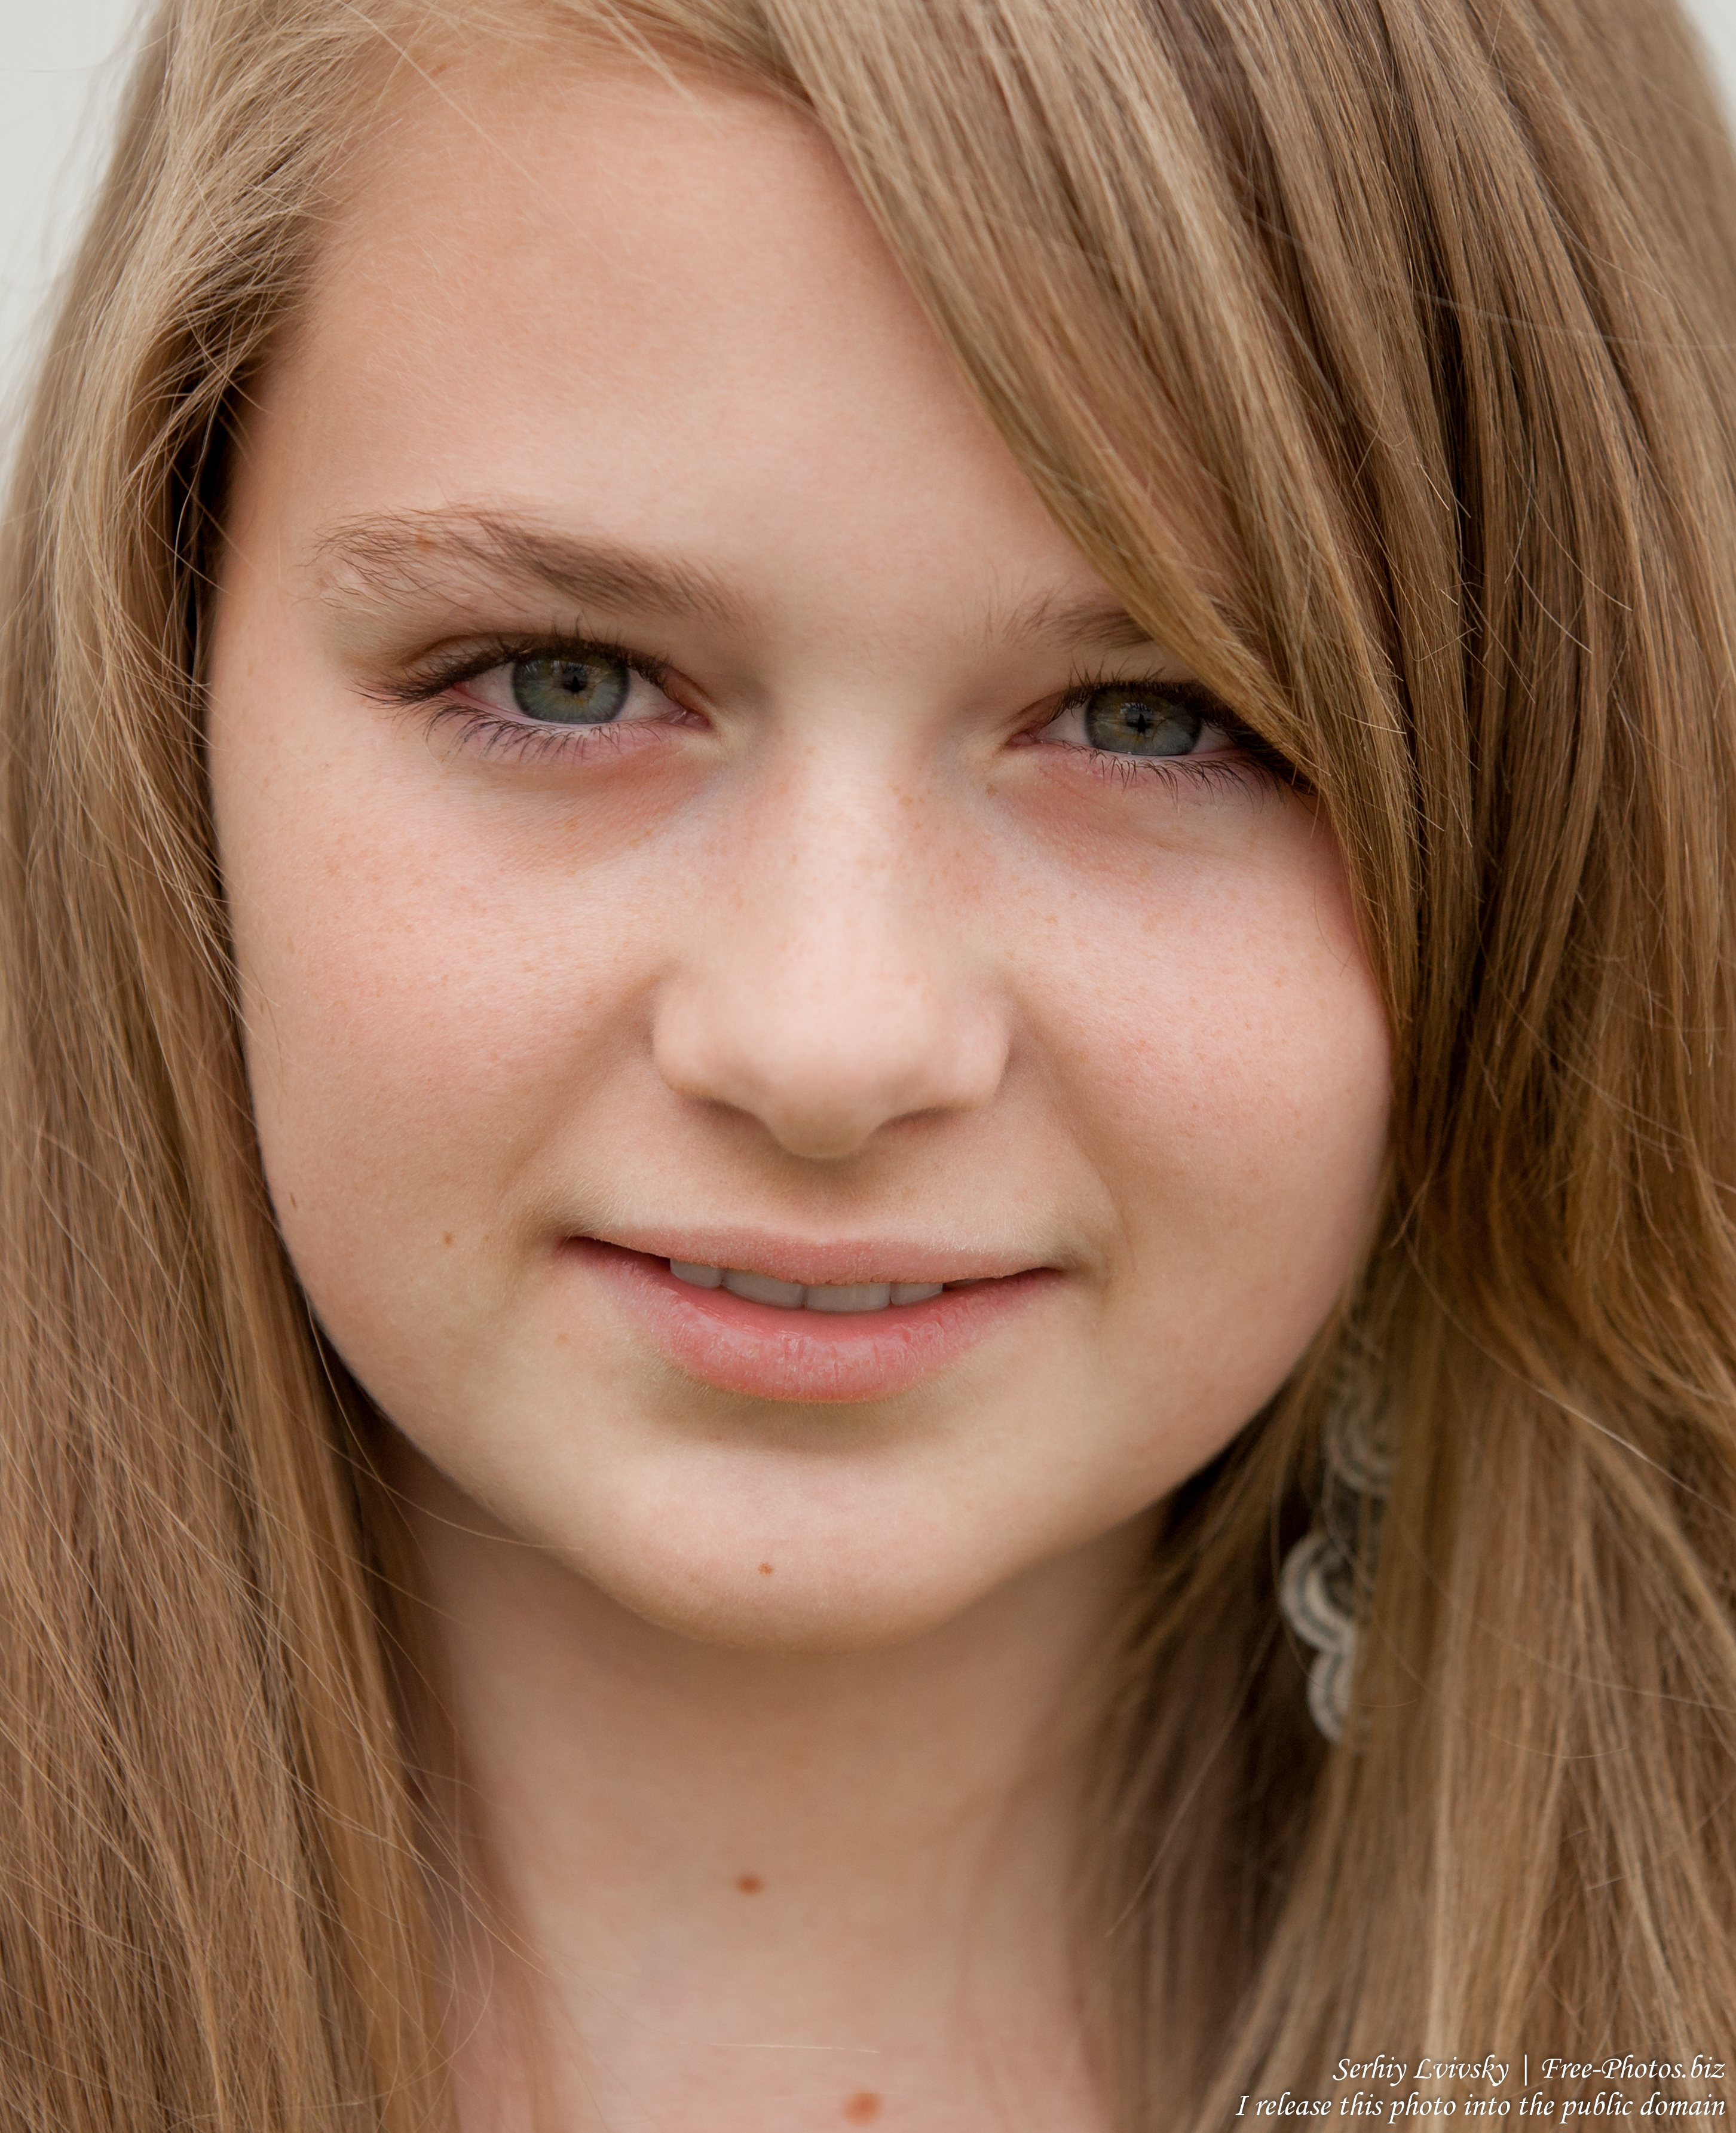 a blond 13-year-old girl photographed in June 2015, picture 1. New free pho...